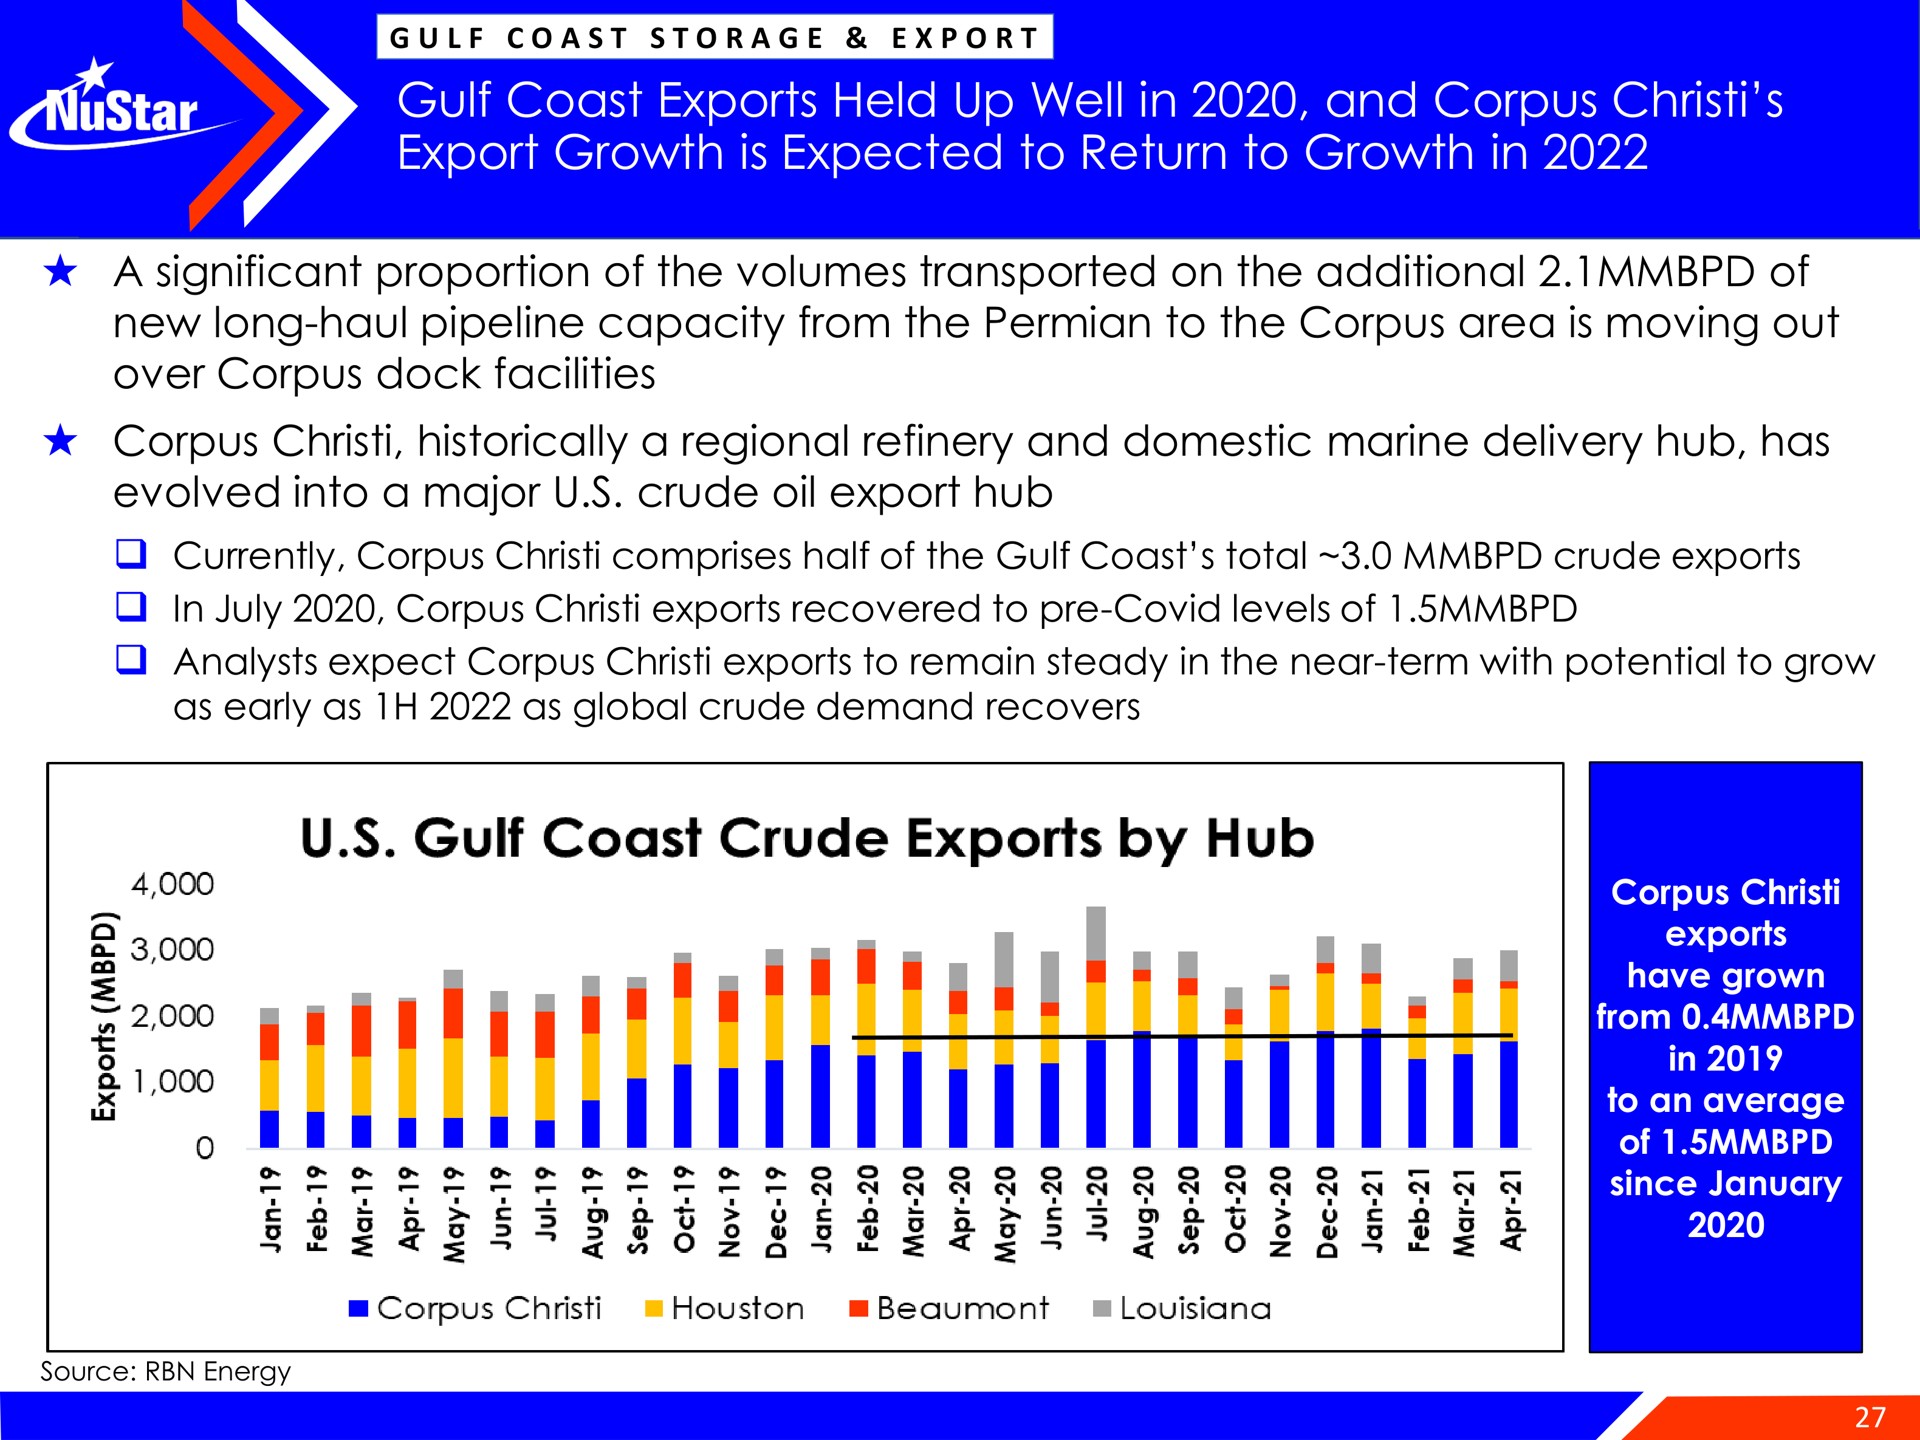 gulf coast exports held up well in and corpus export growth is expected to return to growth in crude by hub from a | NuStar Energy